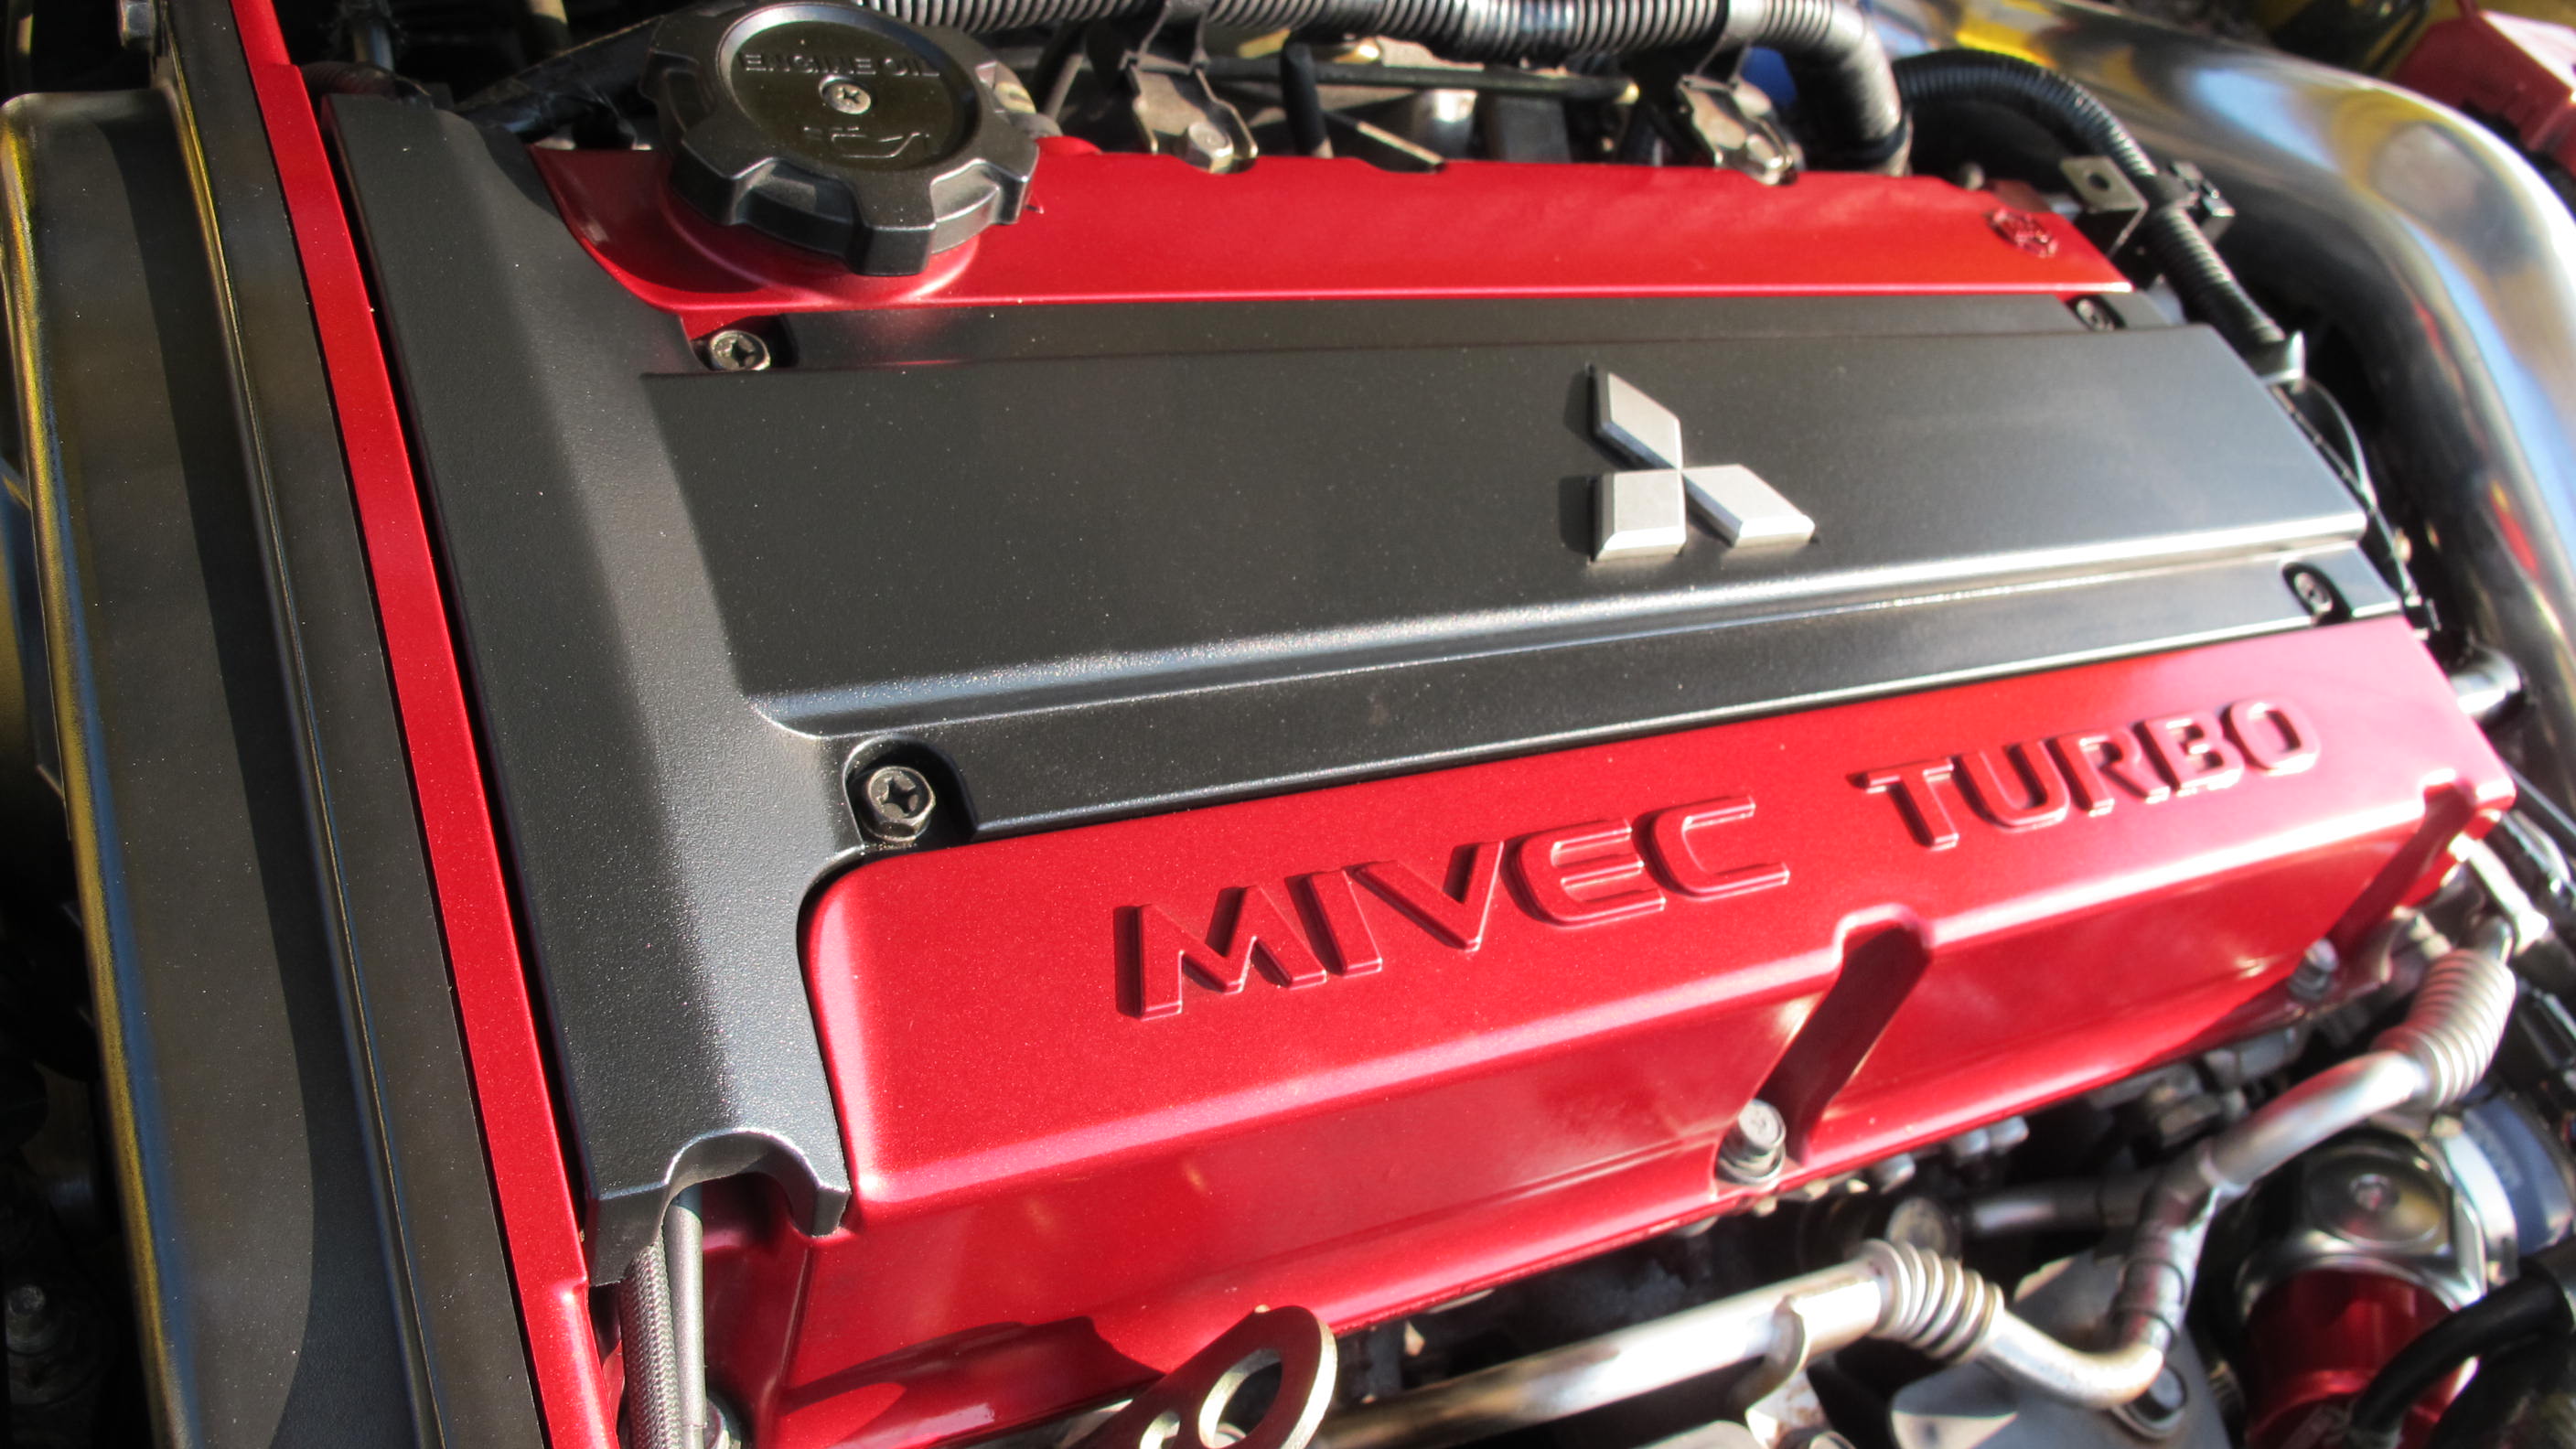 February Special offer – Mitsubishi Evo Service and cambelt £399+vat